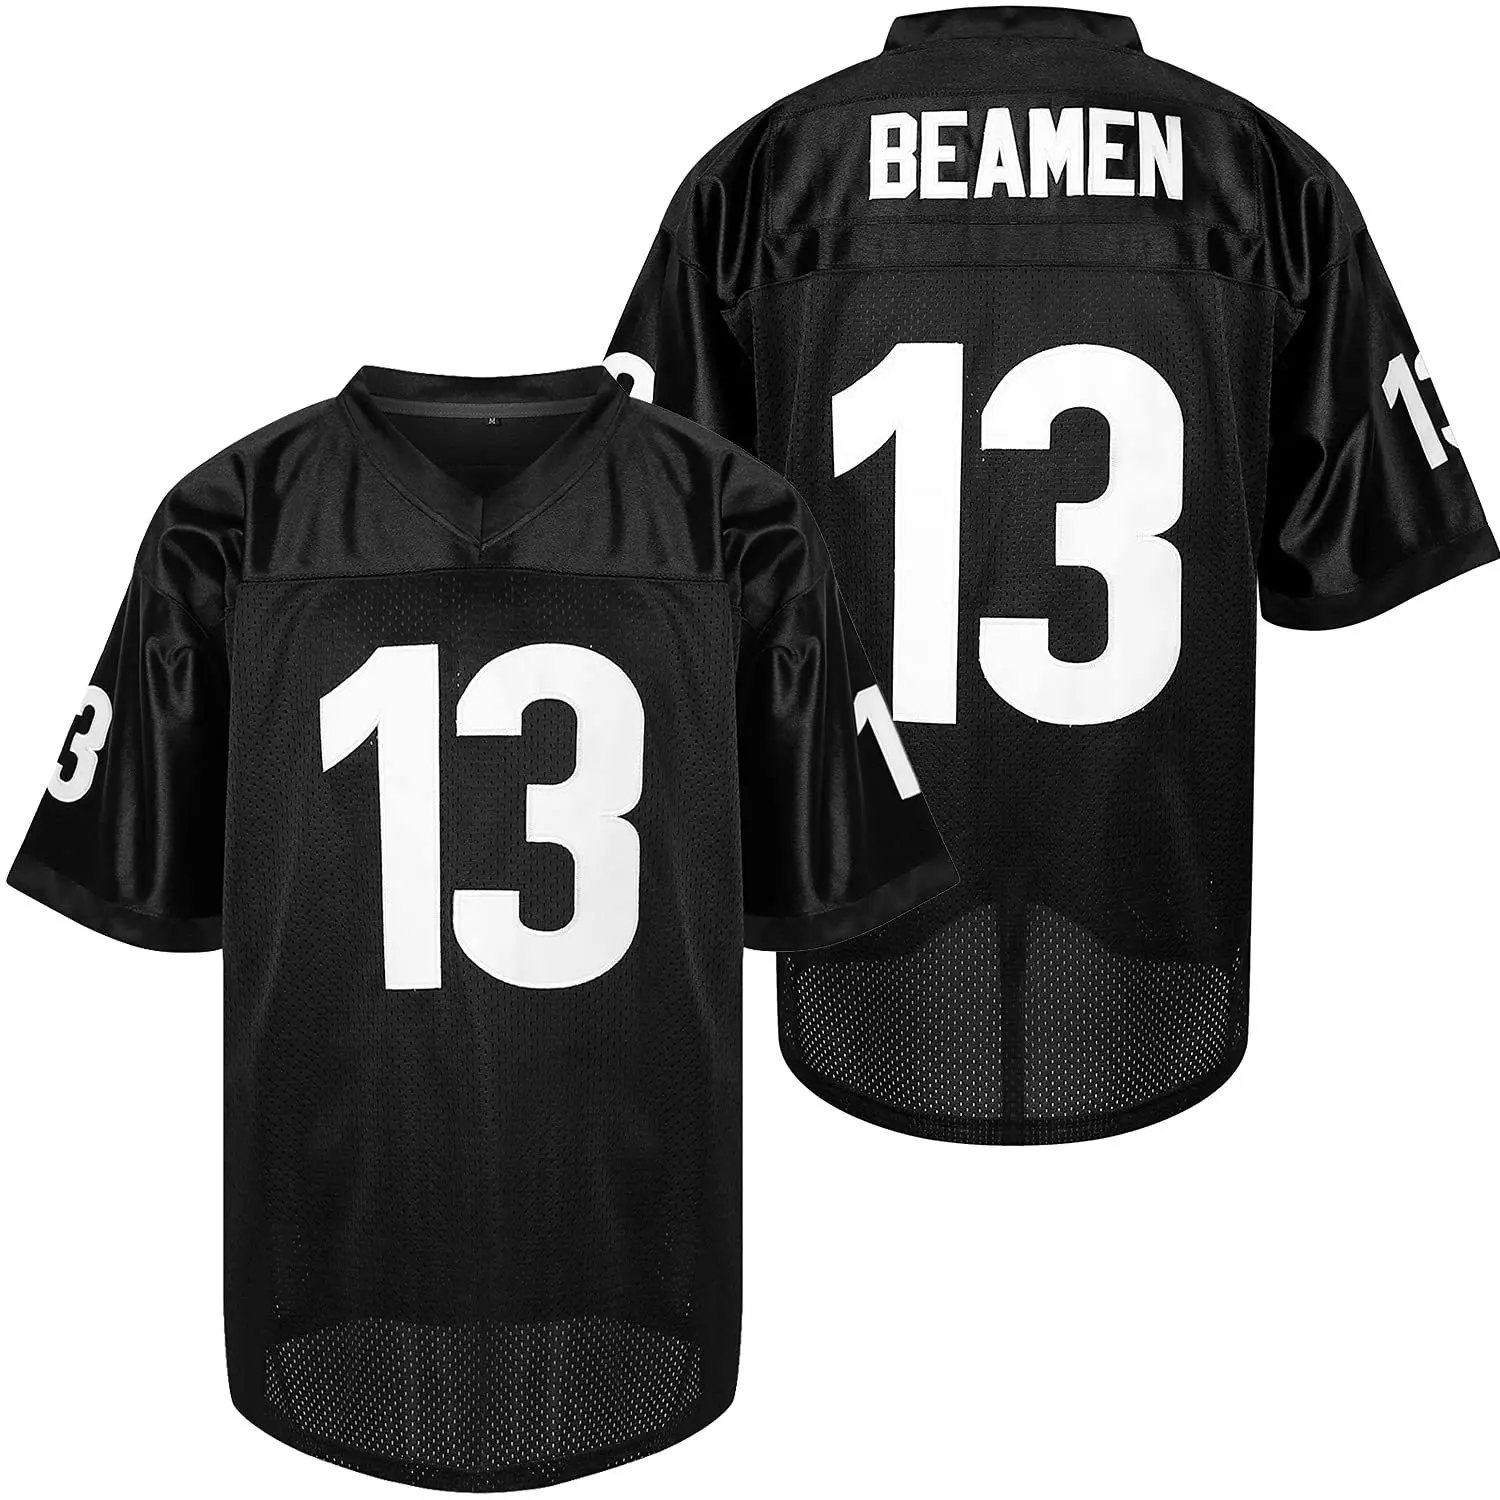 Willie Beamen #13 Any Given Sunday Sharks Movie Men Football Jersey All Stitched Black S-3XL High Quality